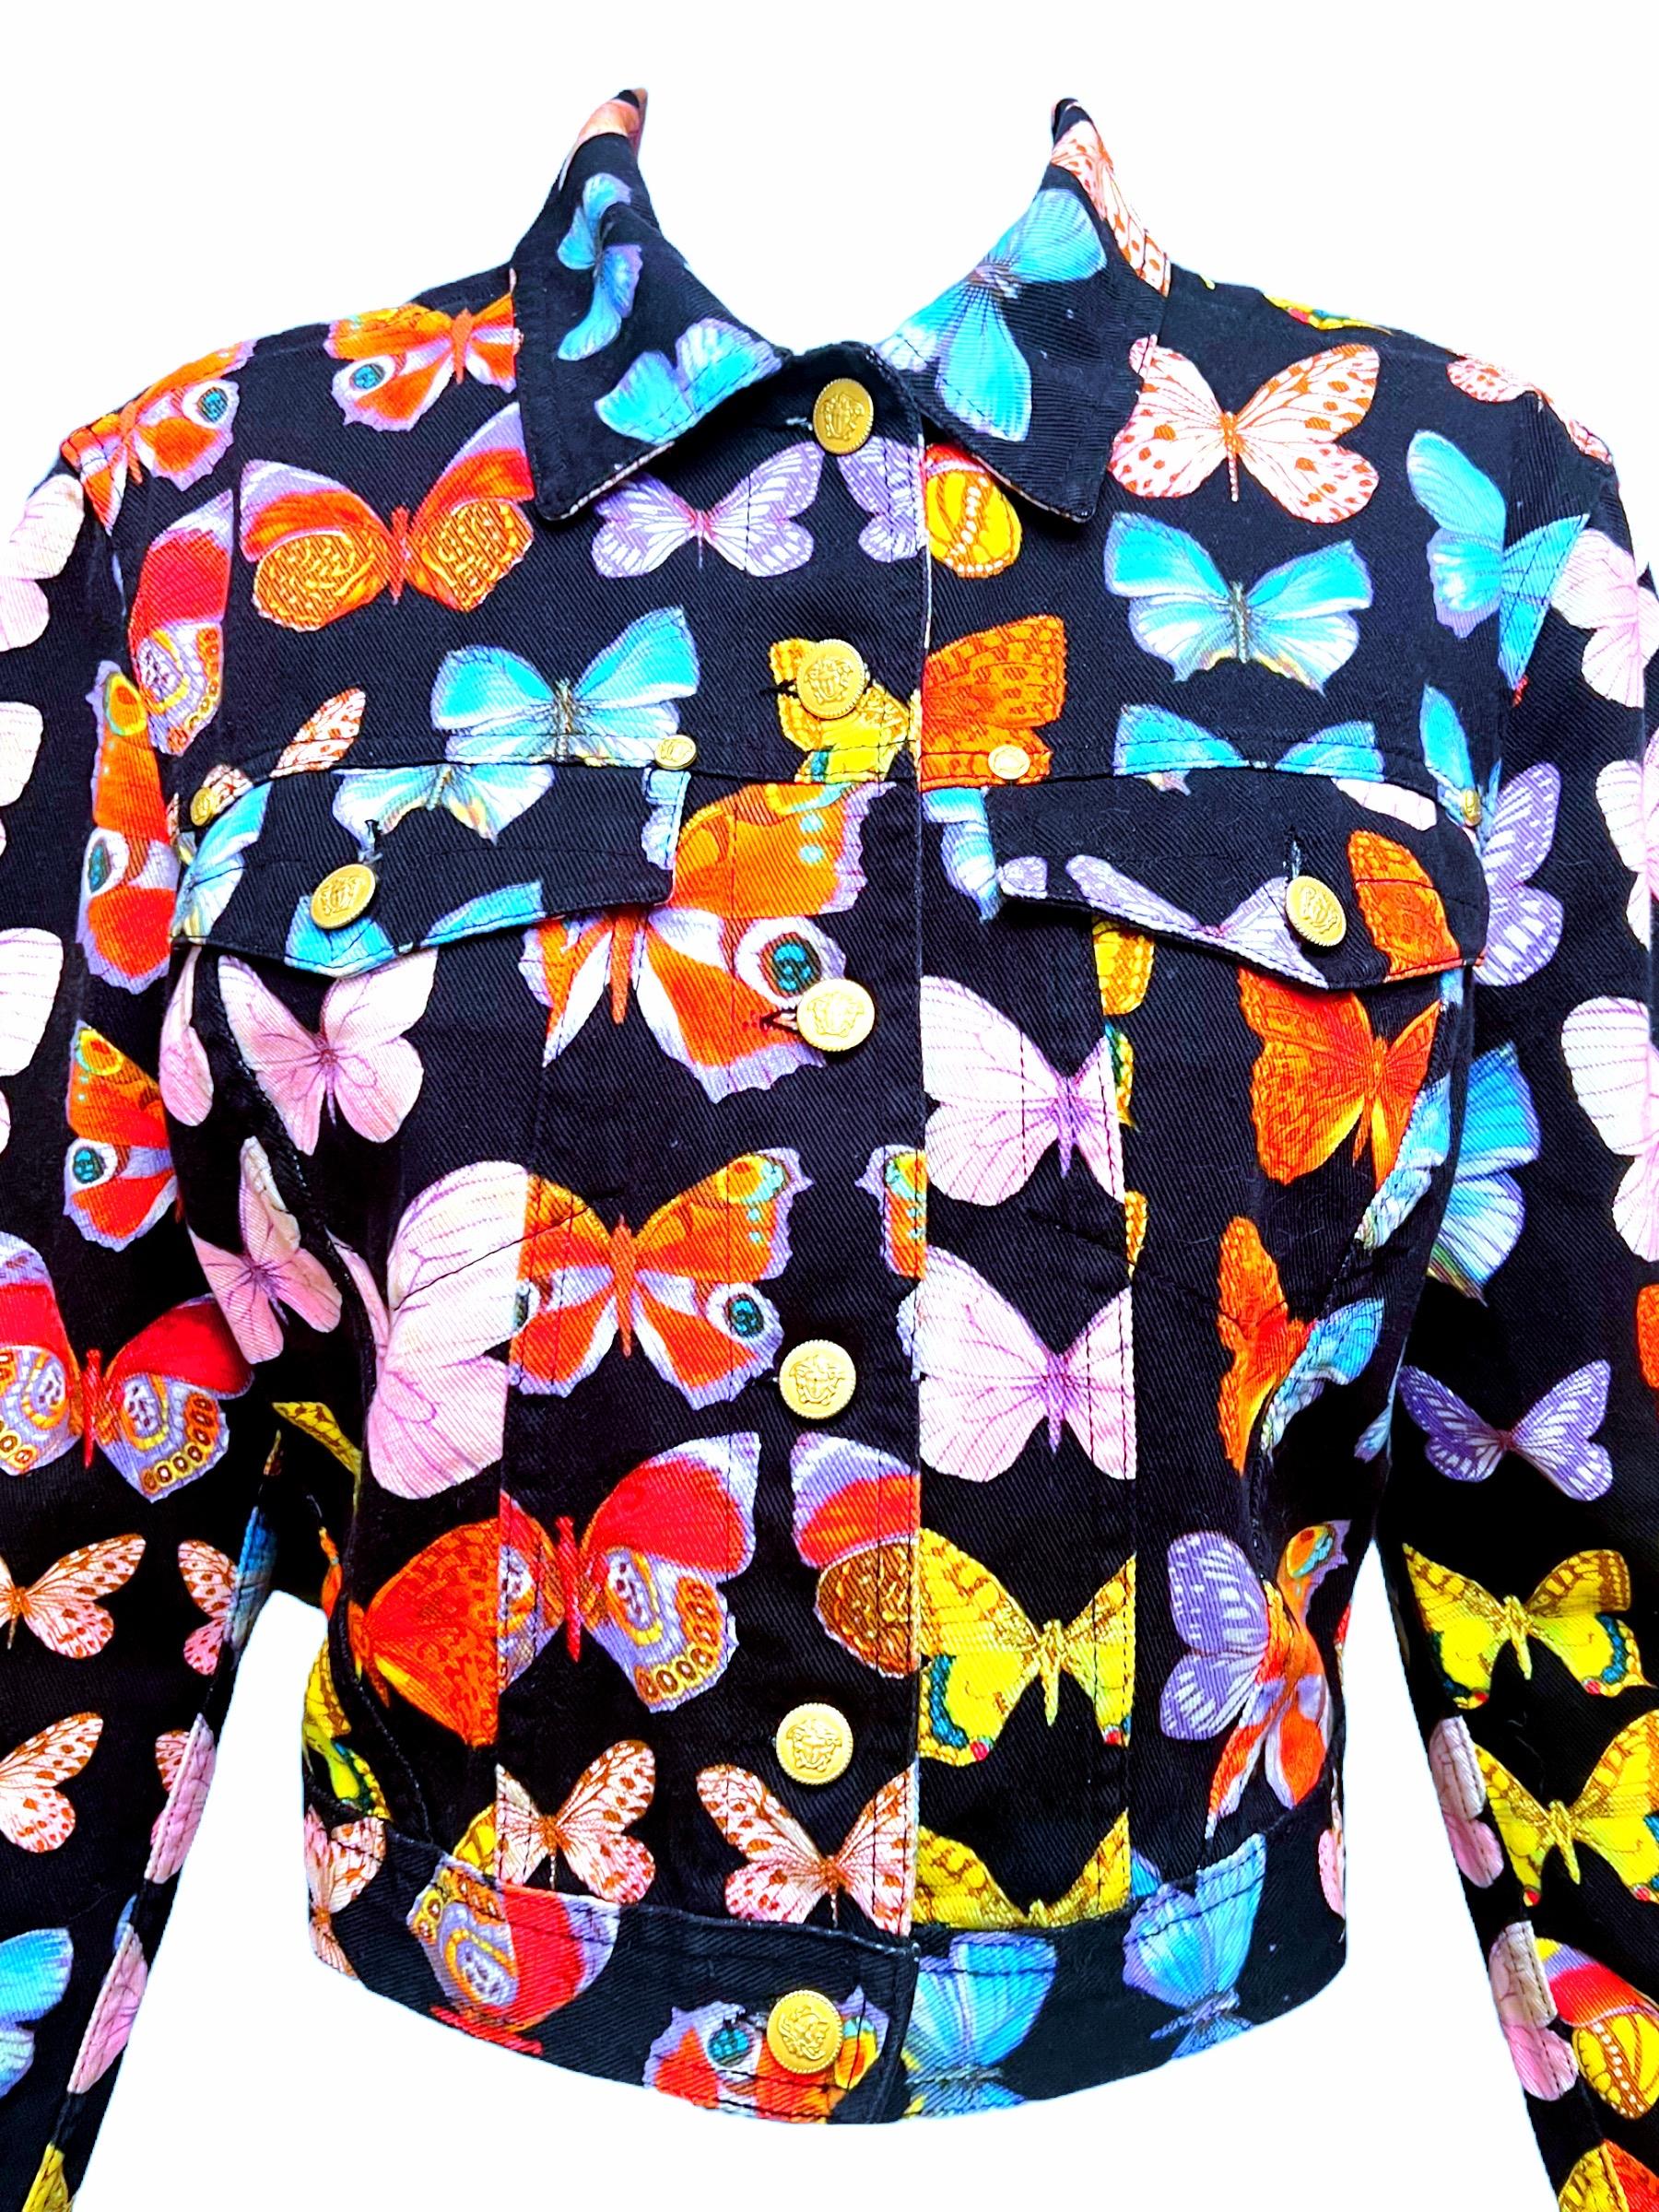 Women's S/S 1995 Gianni Versace Butterfly Printed Jacket For Sale